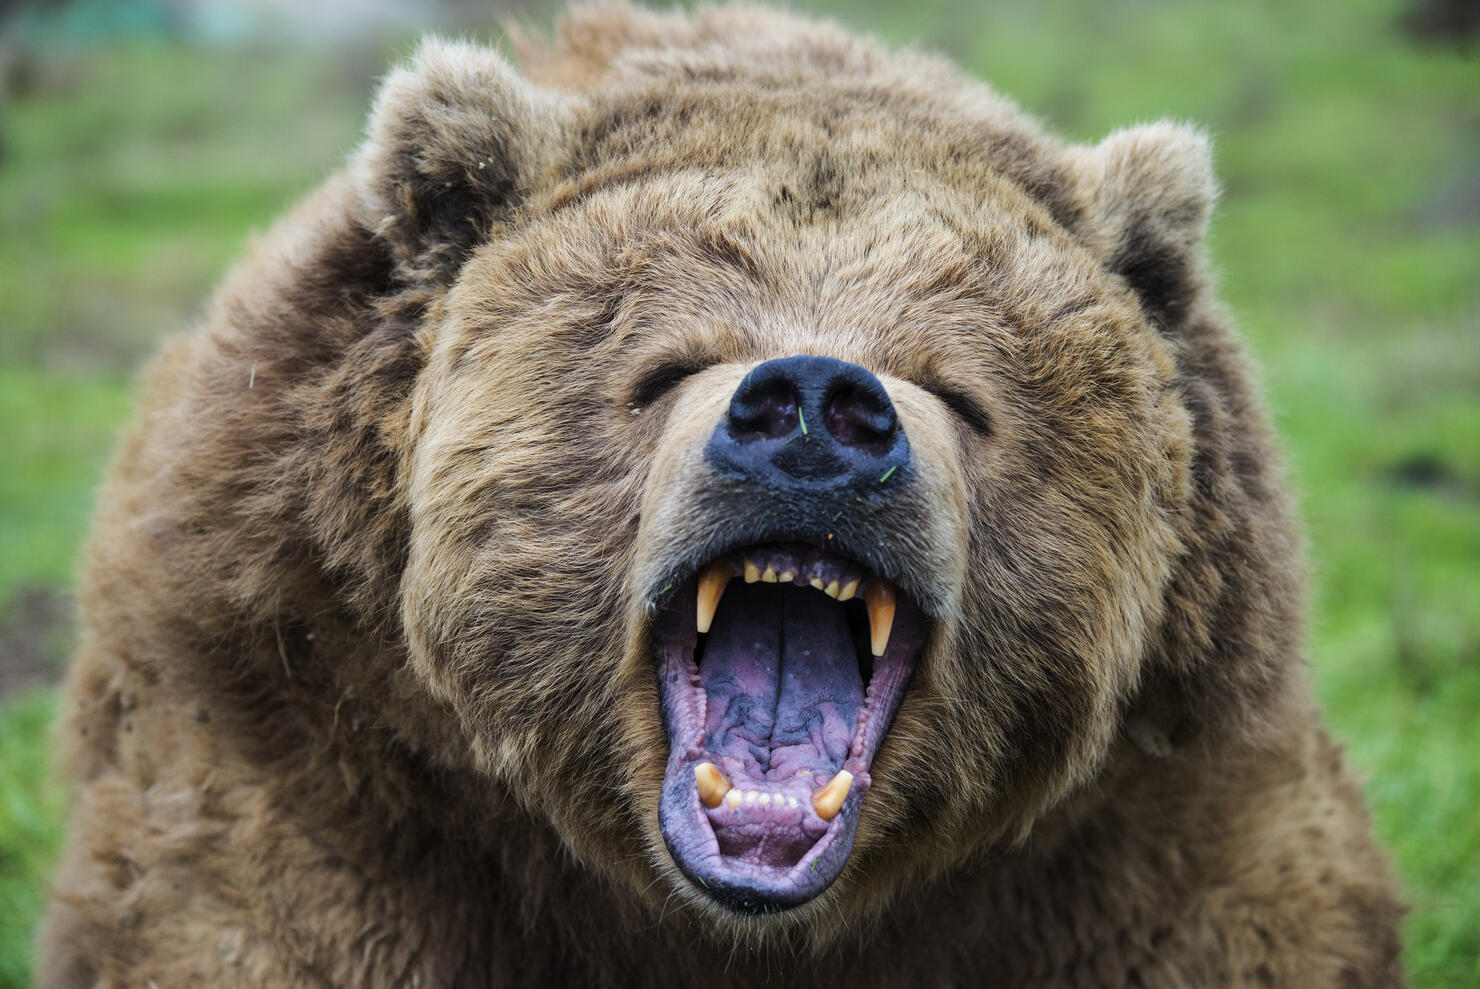 Growling grizzly bear